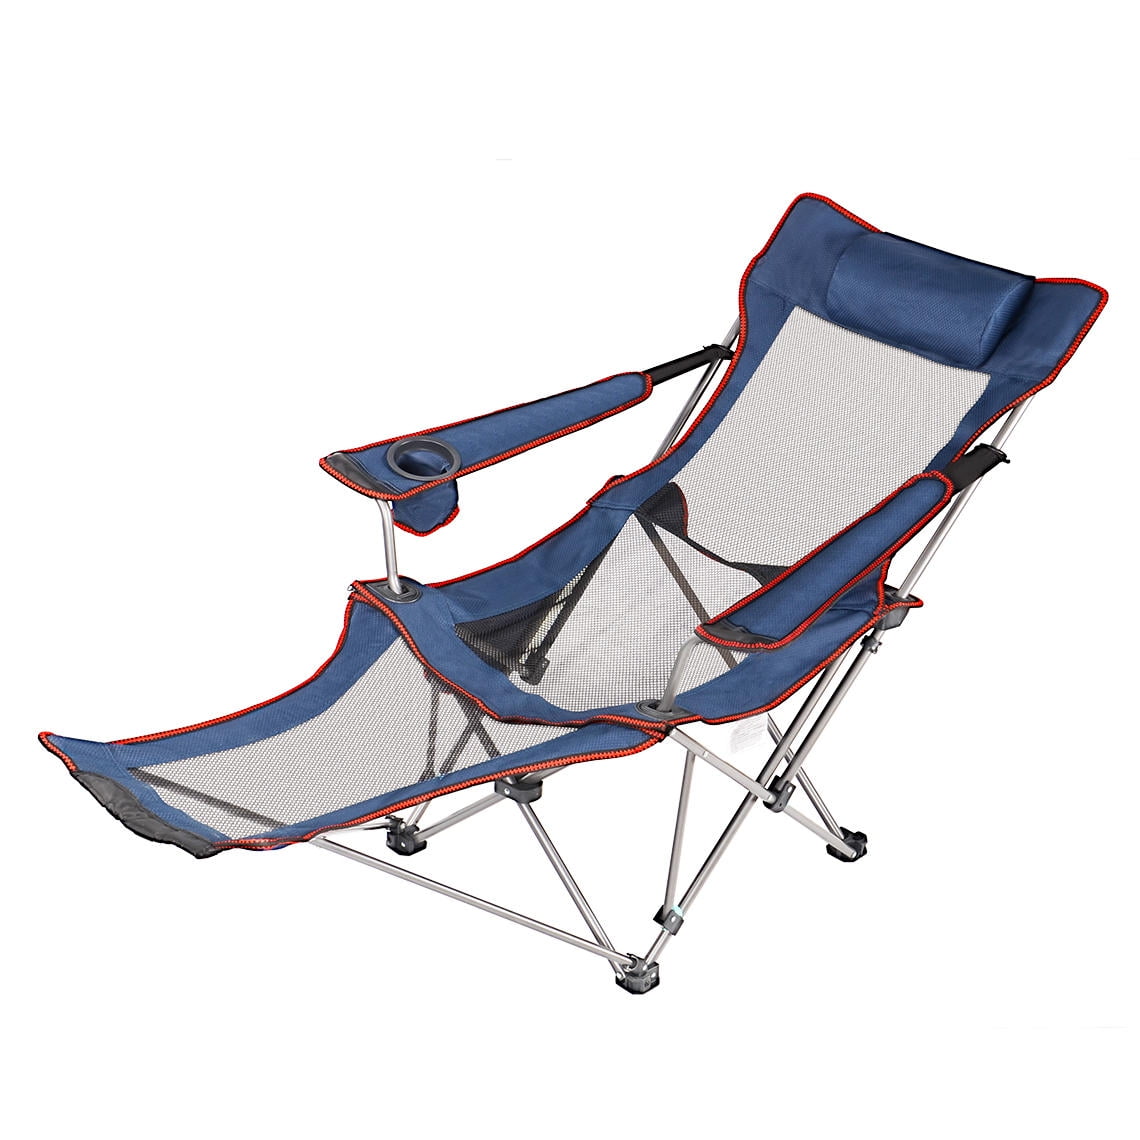 Backpacking Folding Chair with Headrest Footrest and Storage Bag for Outdoor Camping Seatopia Camping Recliner Camping Lounge Chair BBQ. 